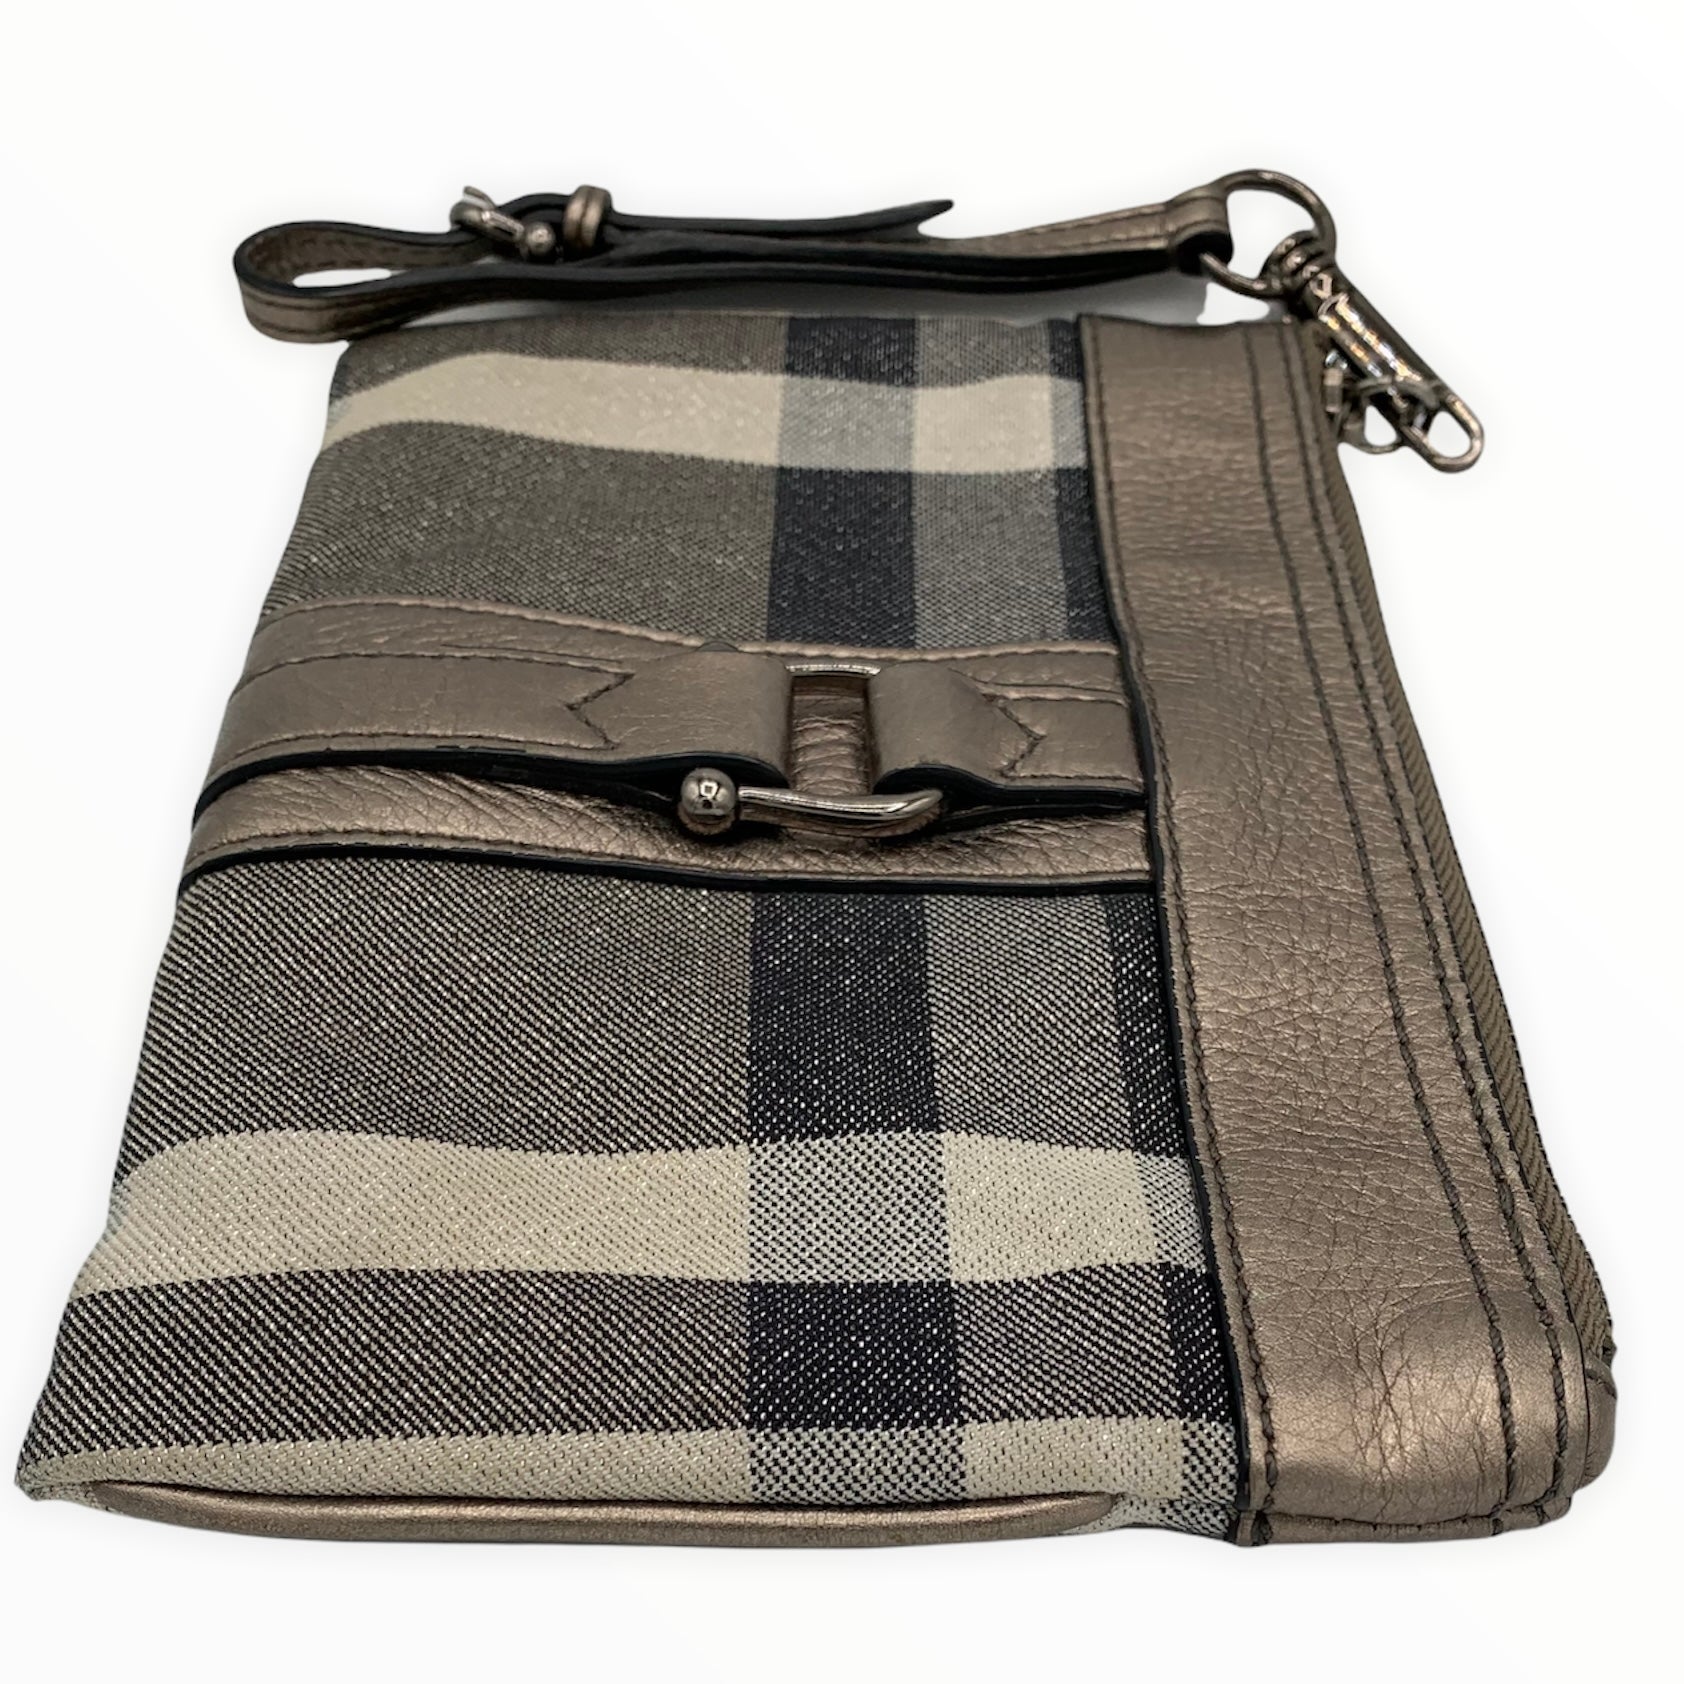 Burberry Small Leather and Vintage Check Crossbody Bag replica